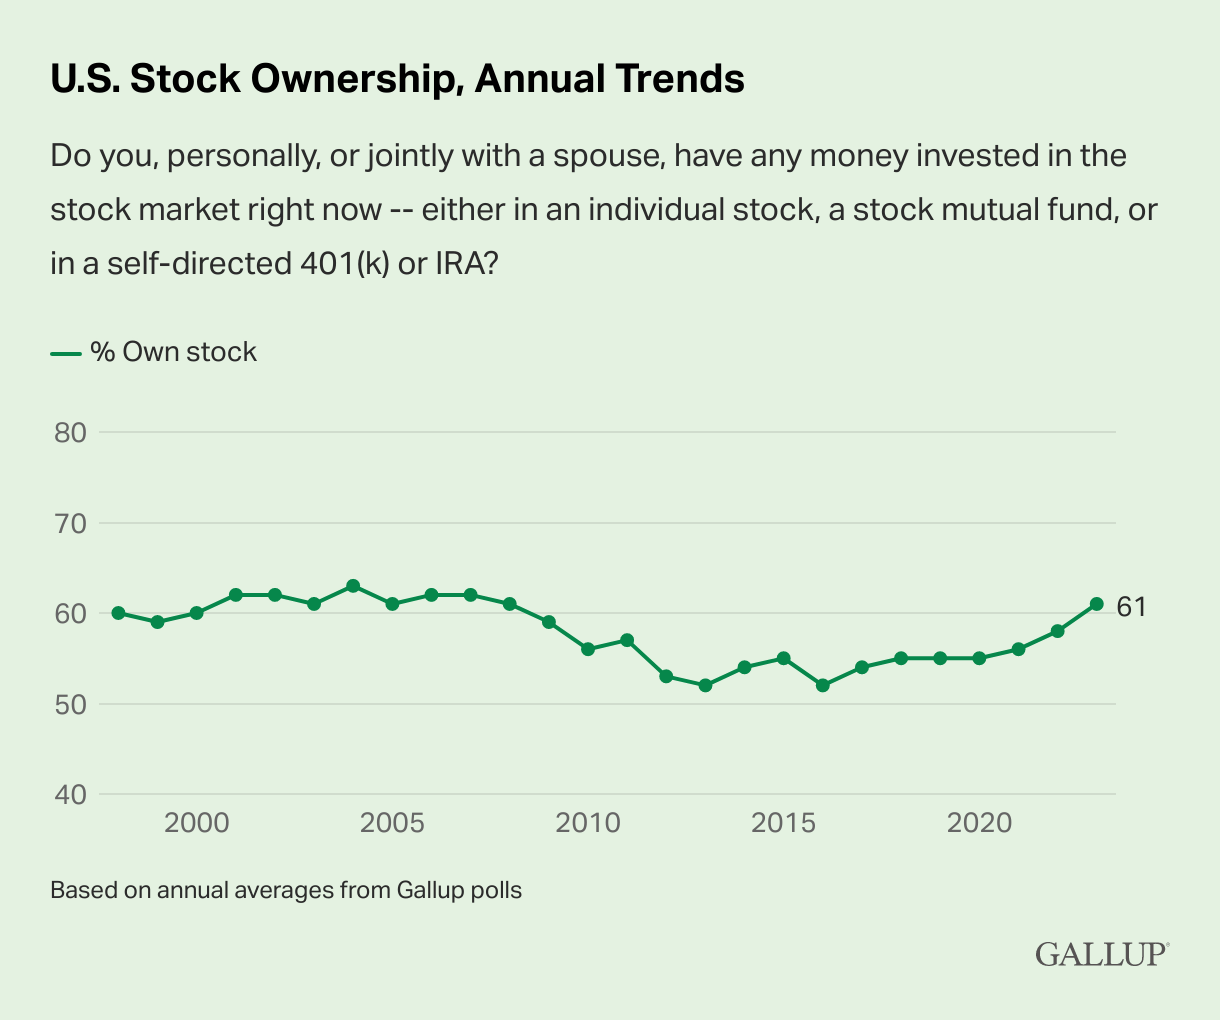 Rebounding from the Great Recession: A Positive Sign for Stock Ownership